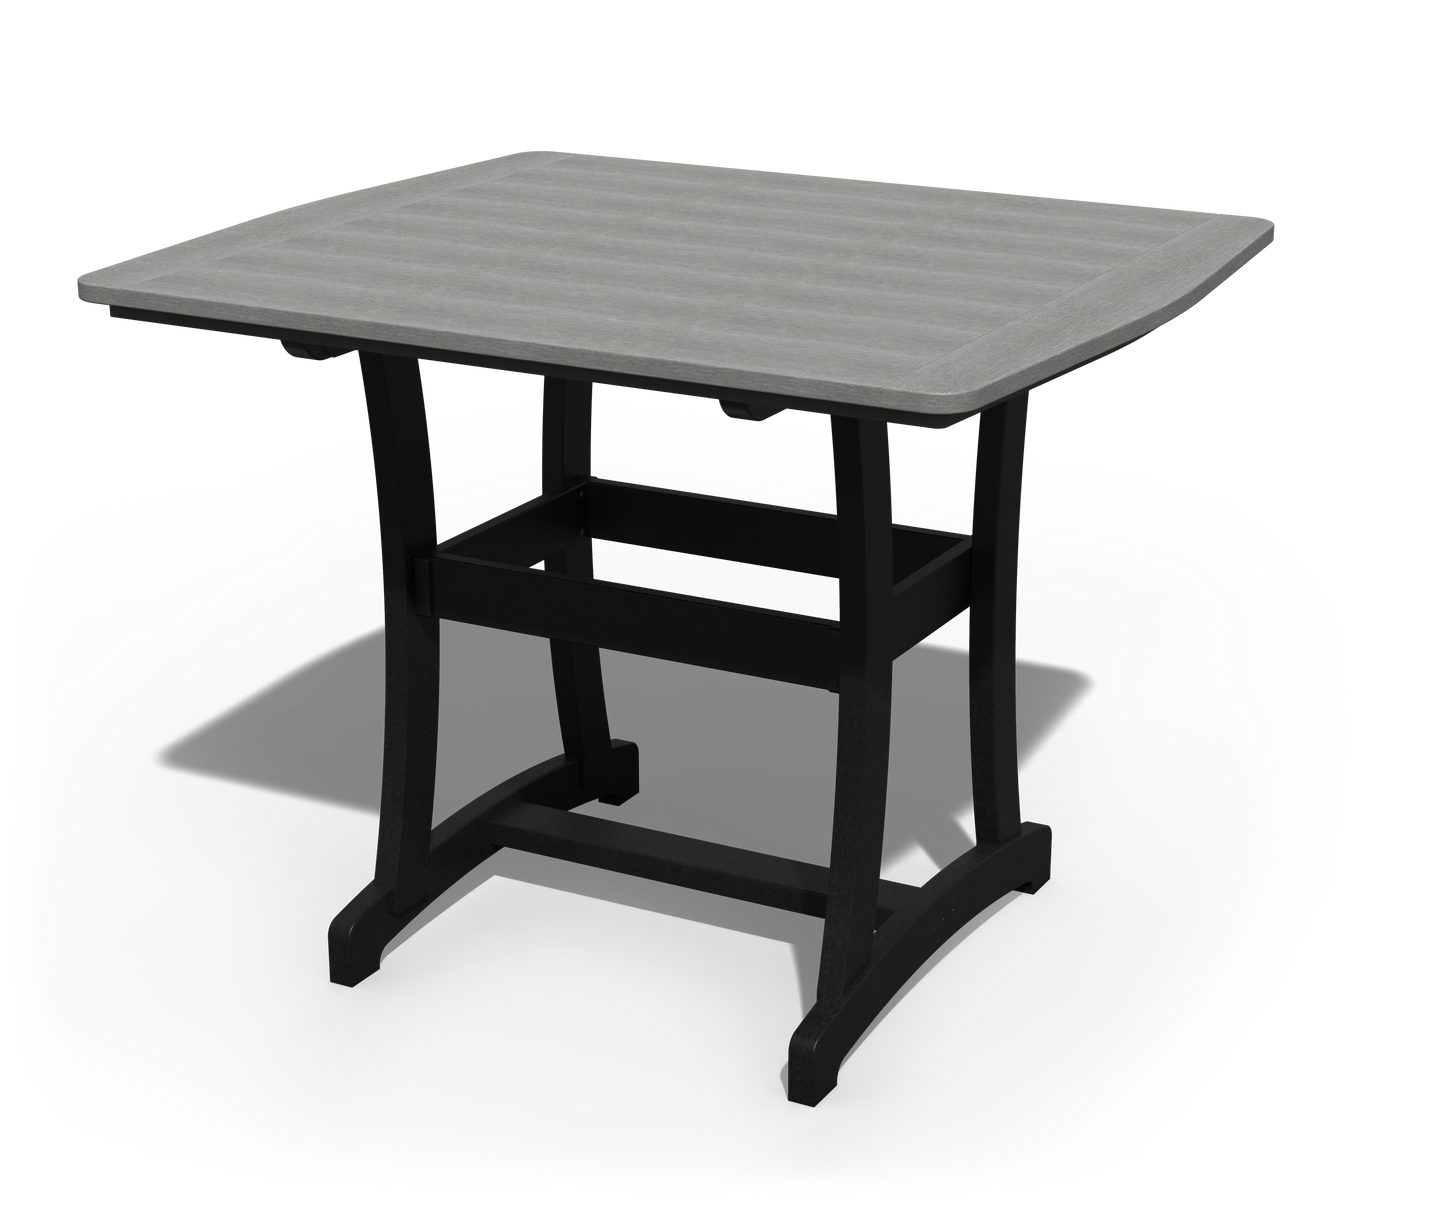 Patiova Recycled Plastic 4'x4' Legacy Bar Table - LEAD TIME TO SHIP 4 WEEKS